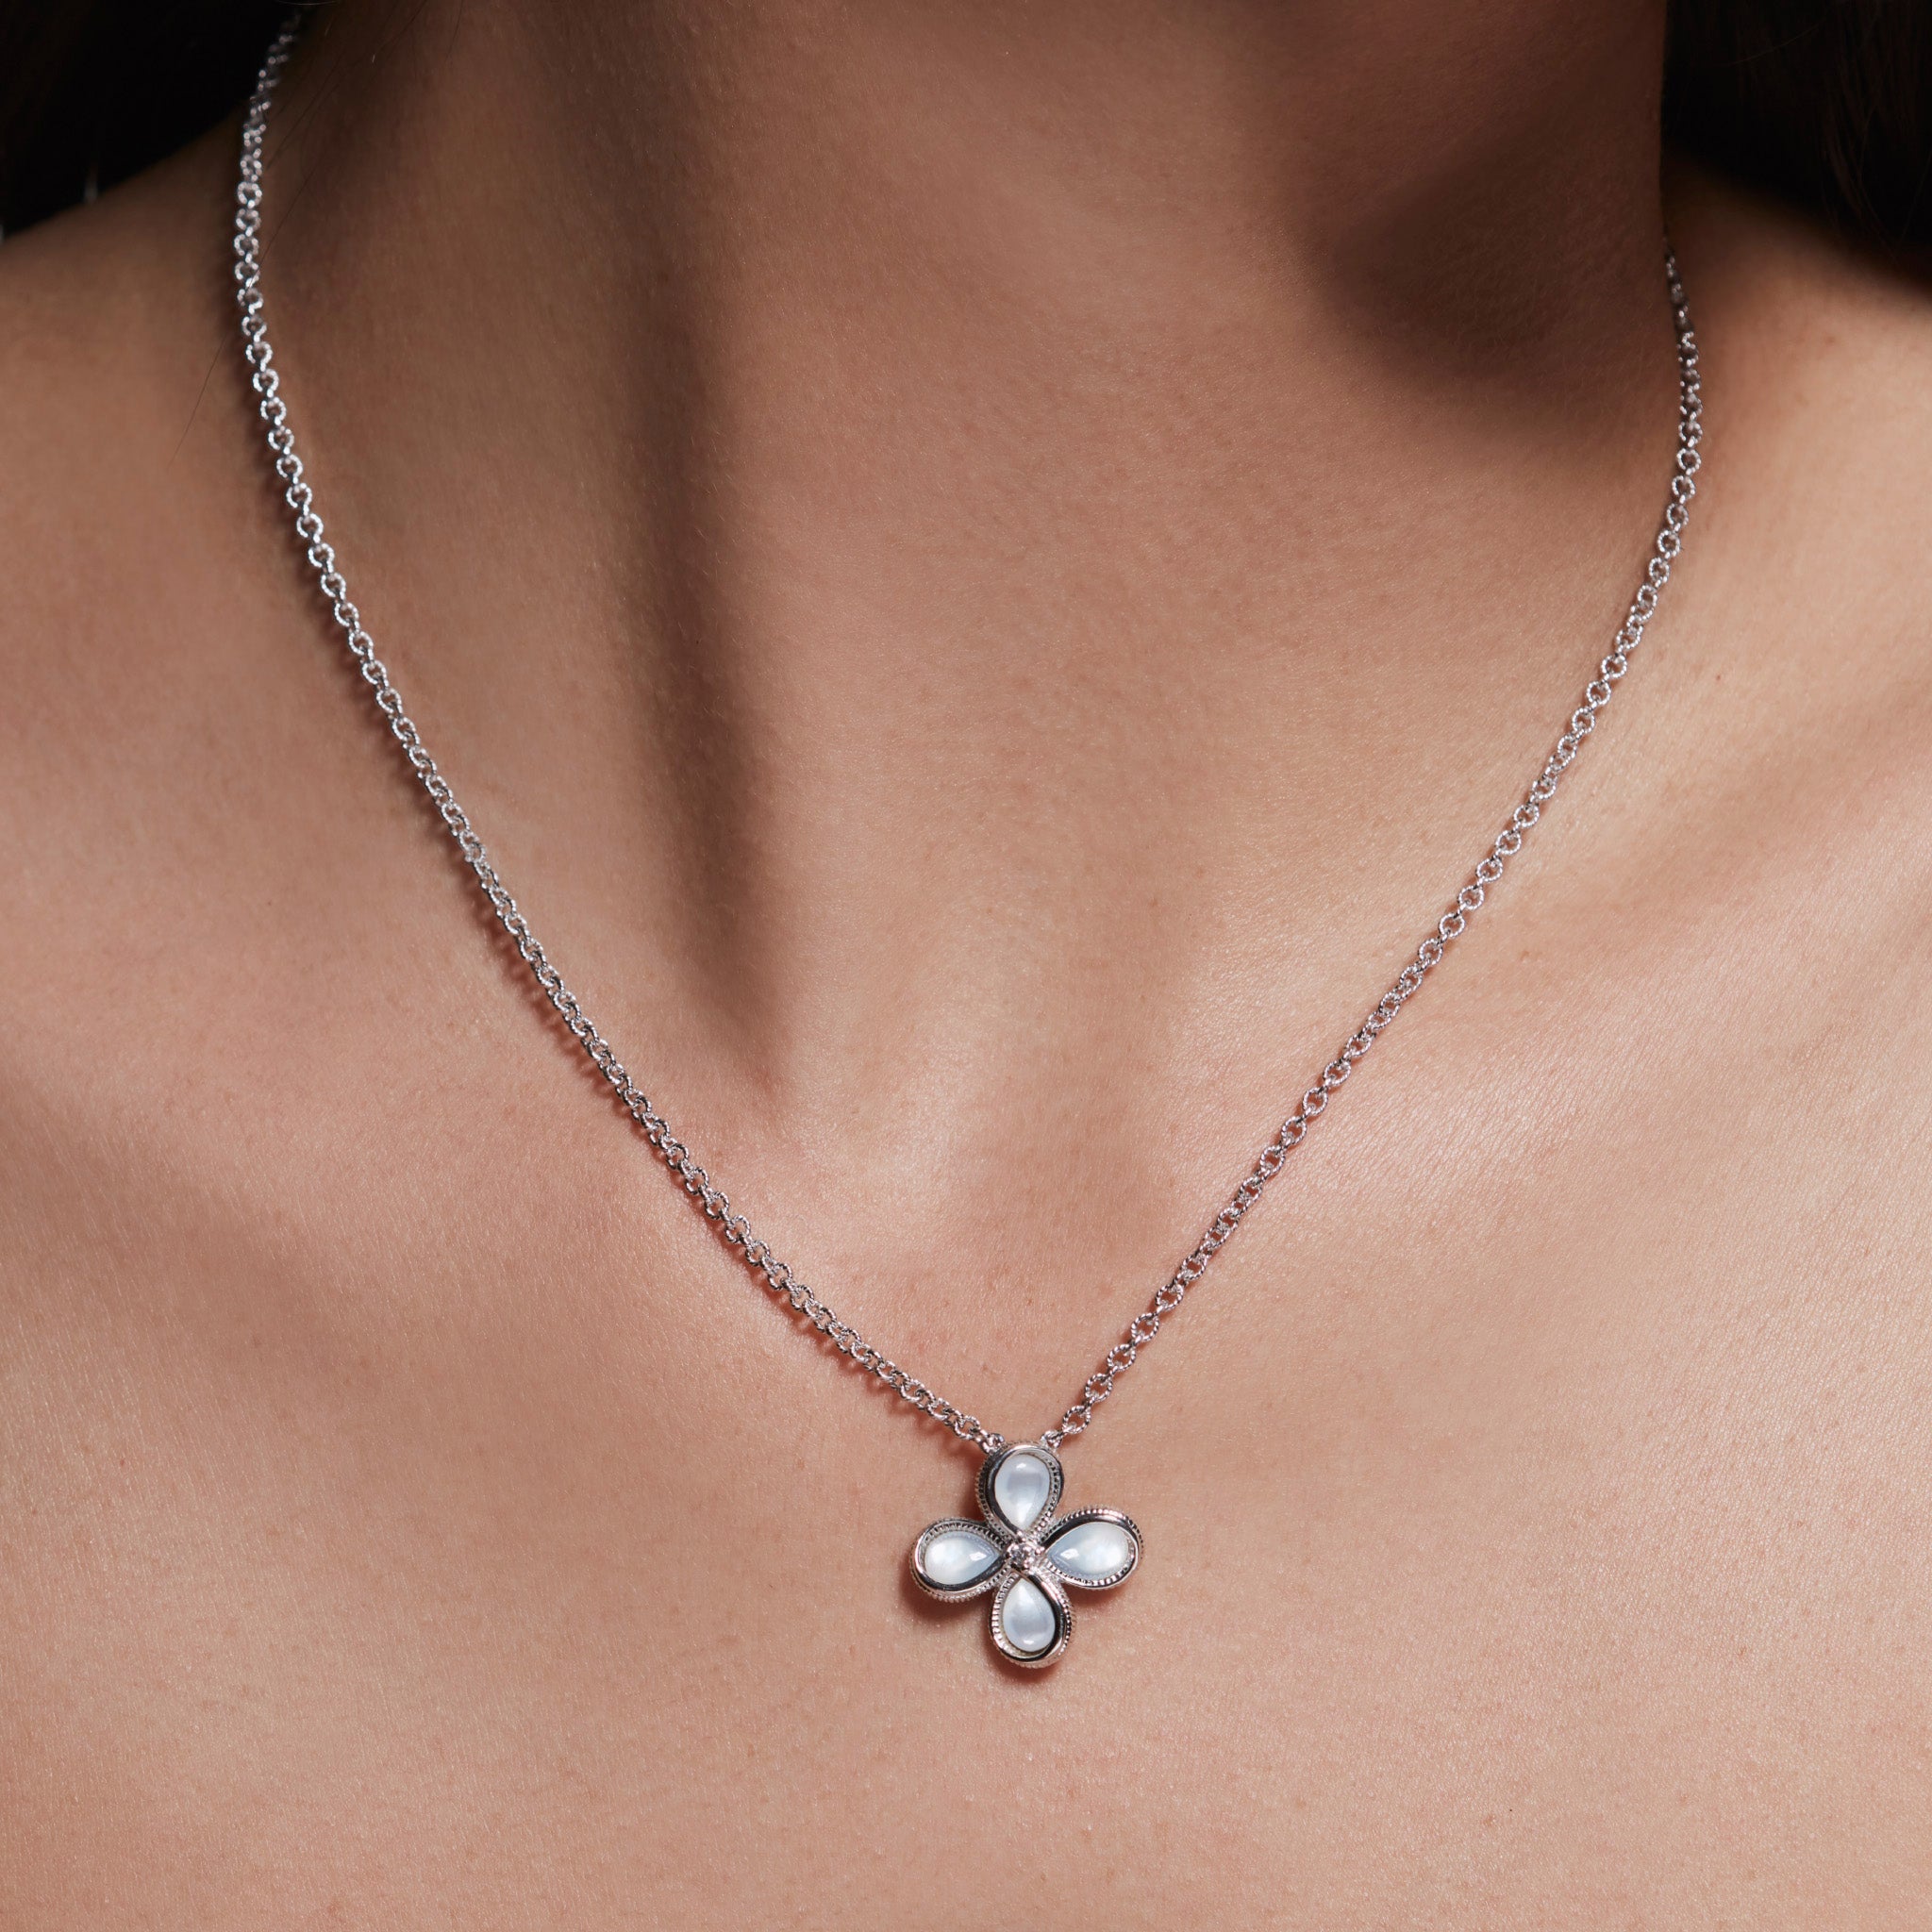 Jardin Flower Pendant Necklace with Mother of Pearl